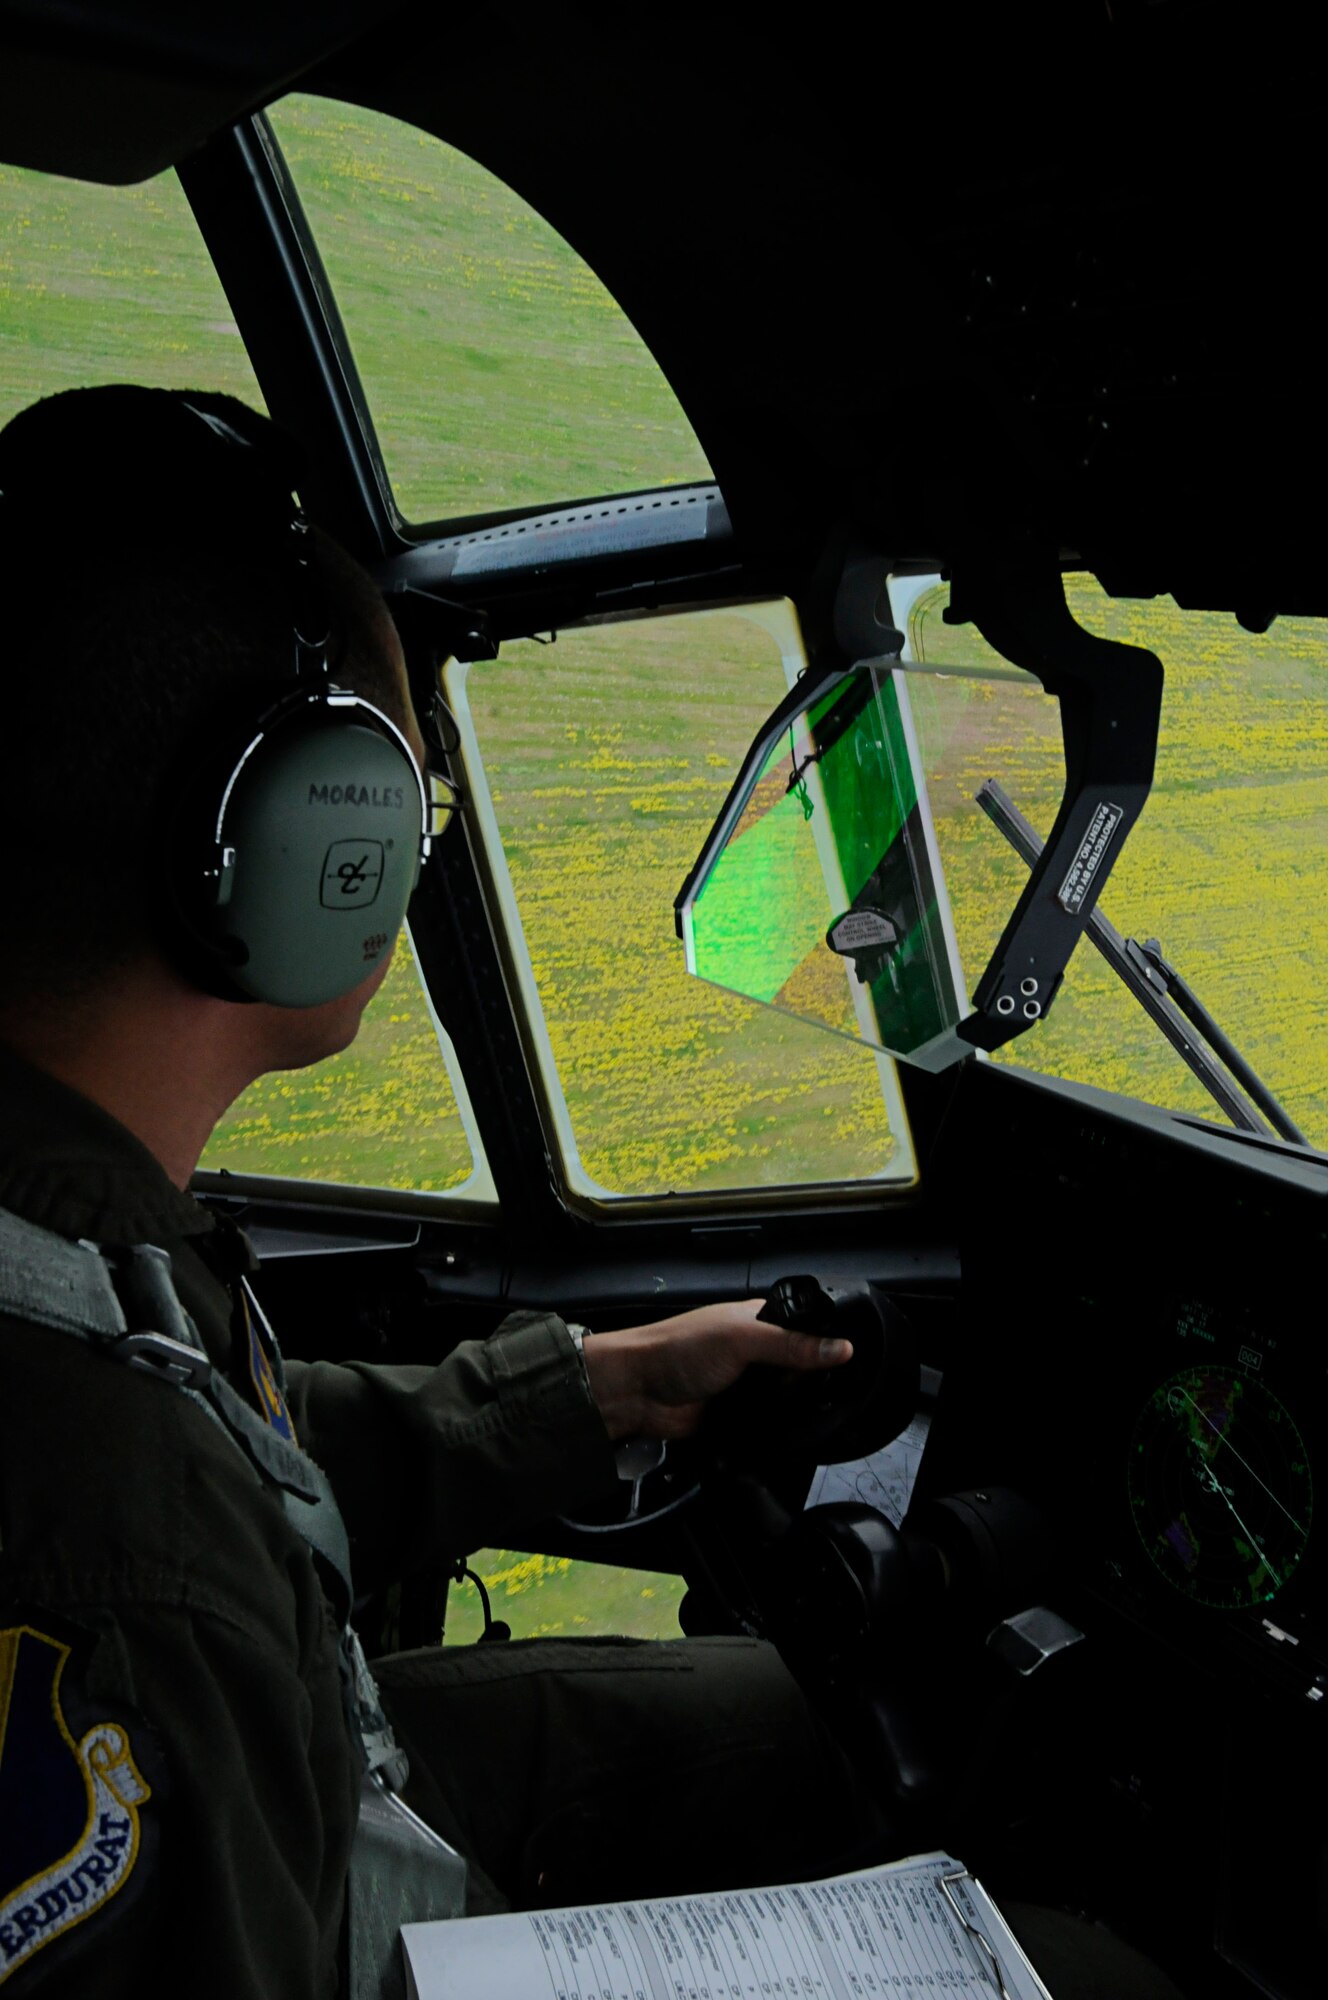 U.S. Air Force Maj. Michael Morales, 37th Airlift Squadron C-130J Super Hercules pilot, flys U.S. and Bulgarian Air Force paratroopers to the drop zone during a joint static line jump in support of Thracian Spring 2011, Plovdiv, Bulgaria, April 29, 2011. Thracian Spring 2011 is a two week on-site training designed to build partnerships between the U.S. and Bulgarian Air Force. (U.S. Air Force photo by Airman 1st Class Desiree W. Esposito)